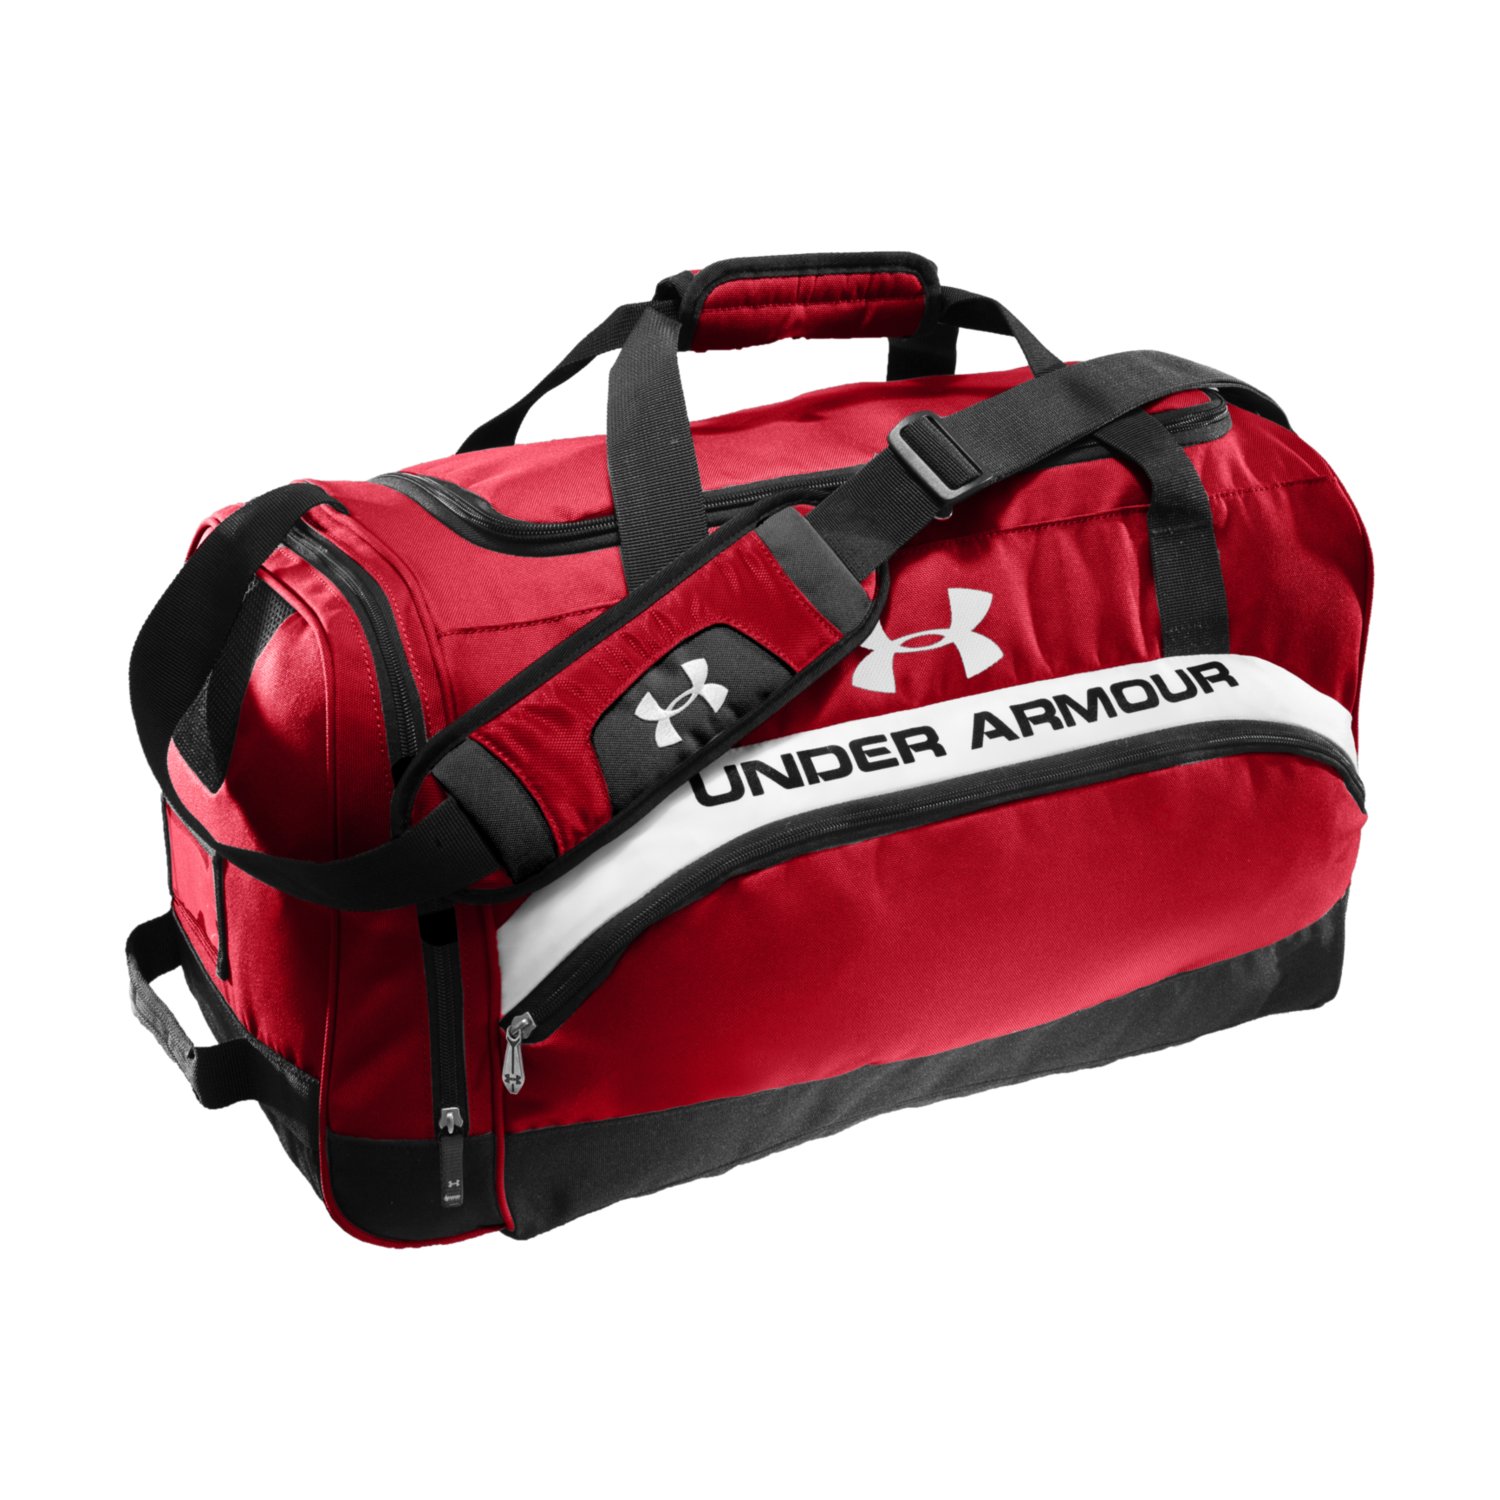 Under Armour PTH Victory Large Team Duffel Bag